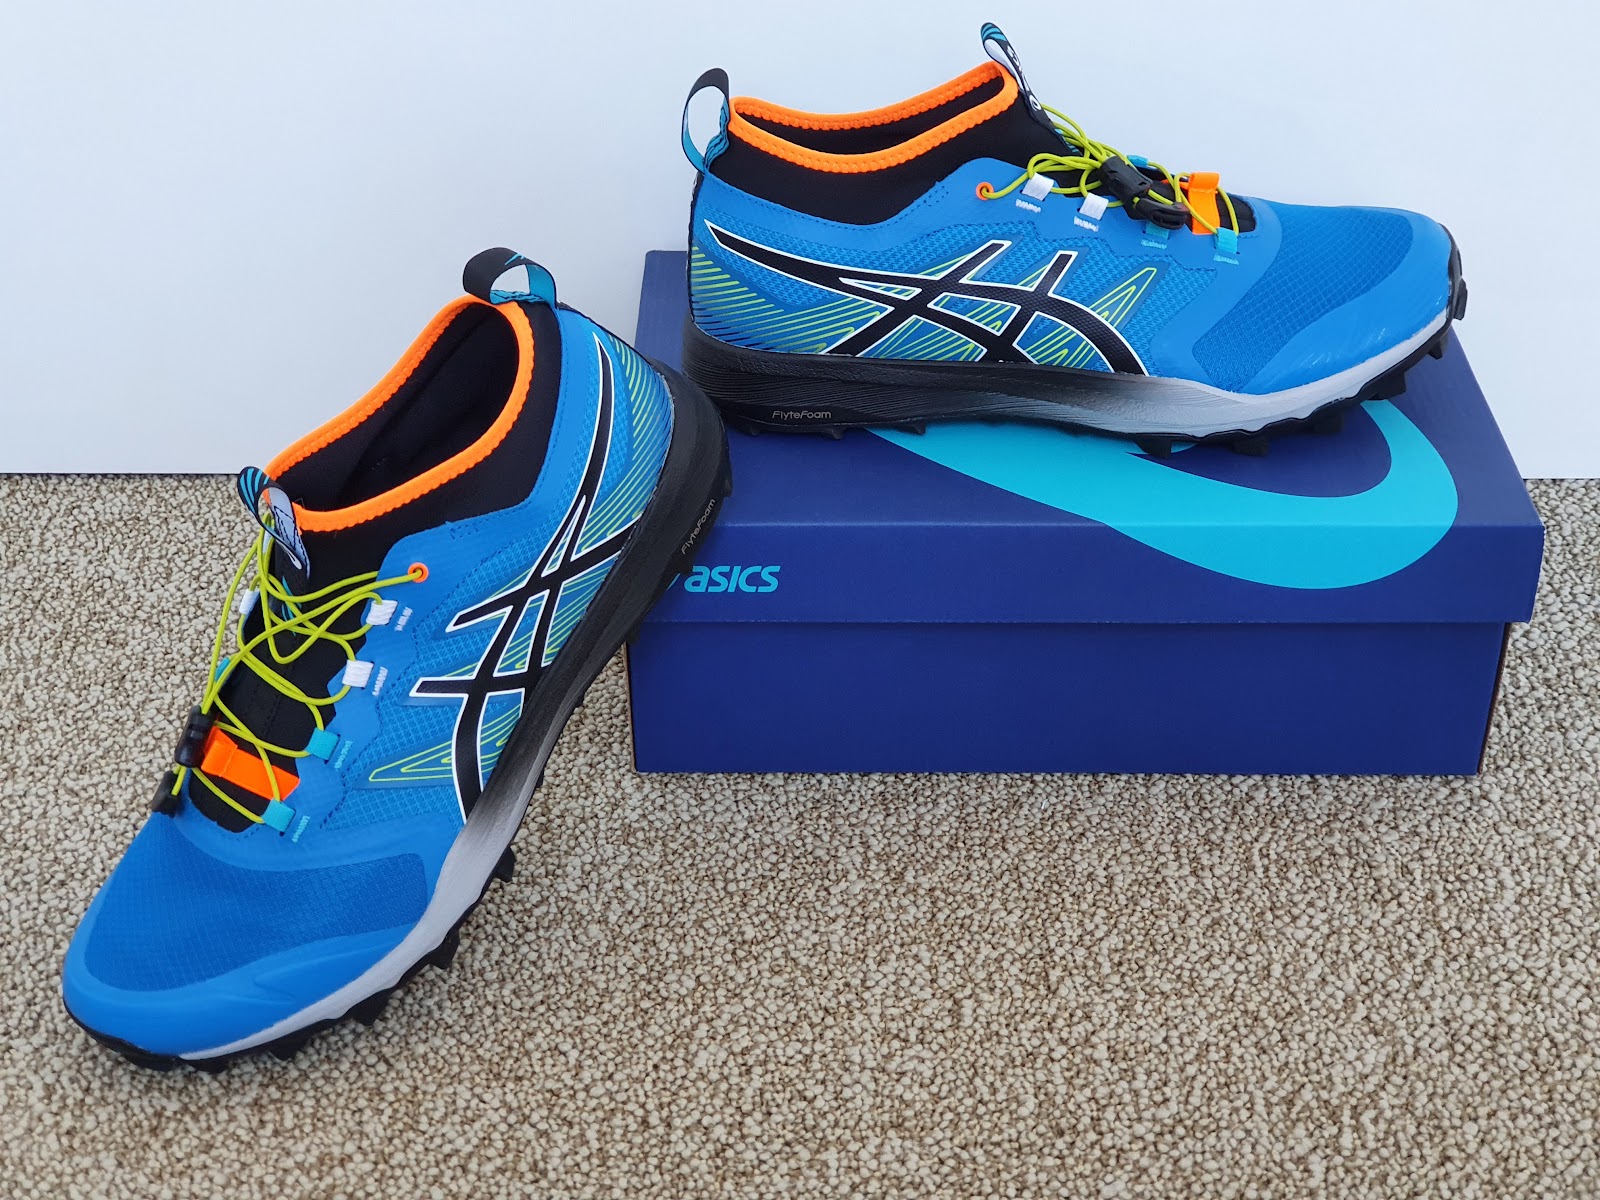 Road Trail Run: ASICS GEL Fujitrabuco Pro Multi Tester Review - A surprise,  to be sure, but a welcome one!